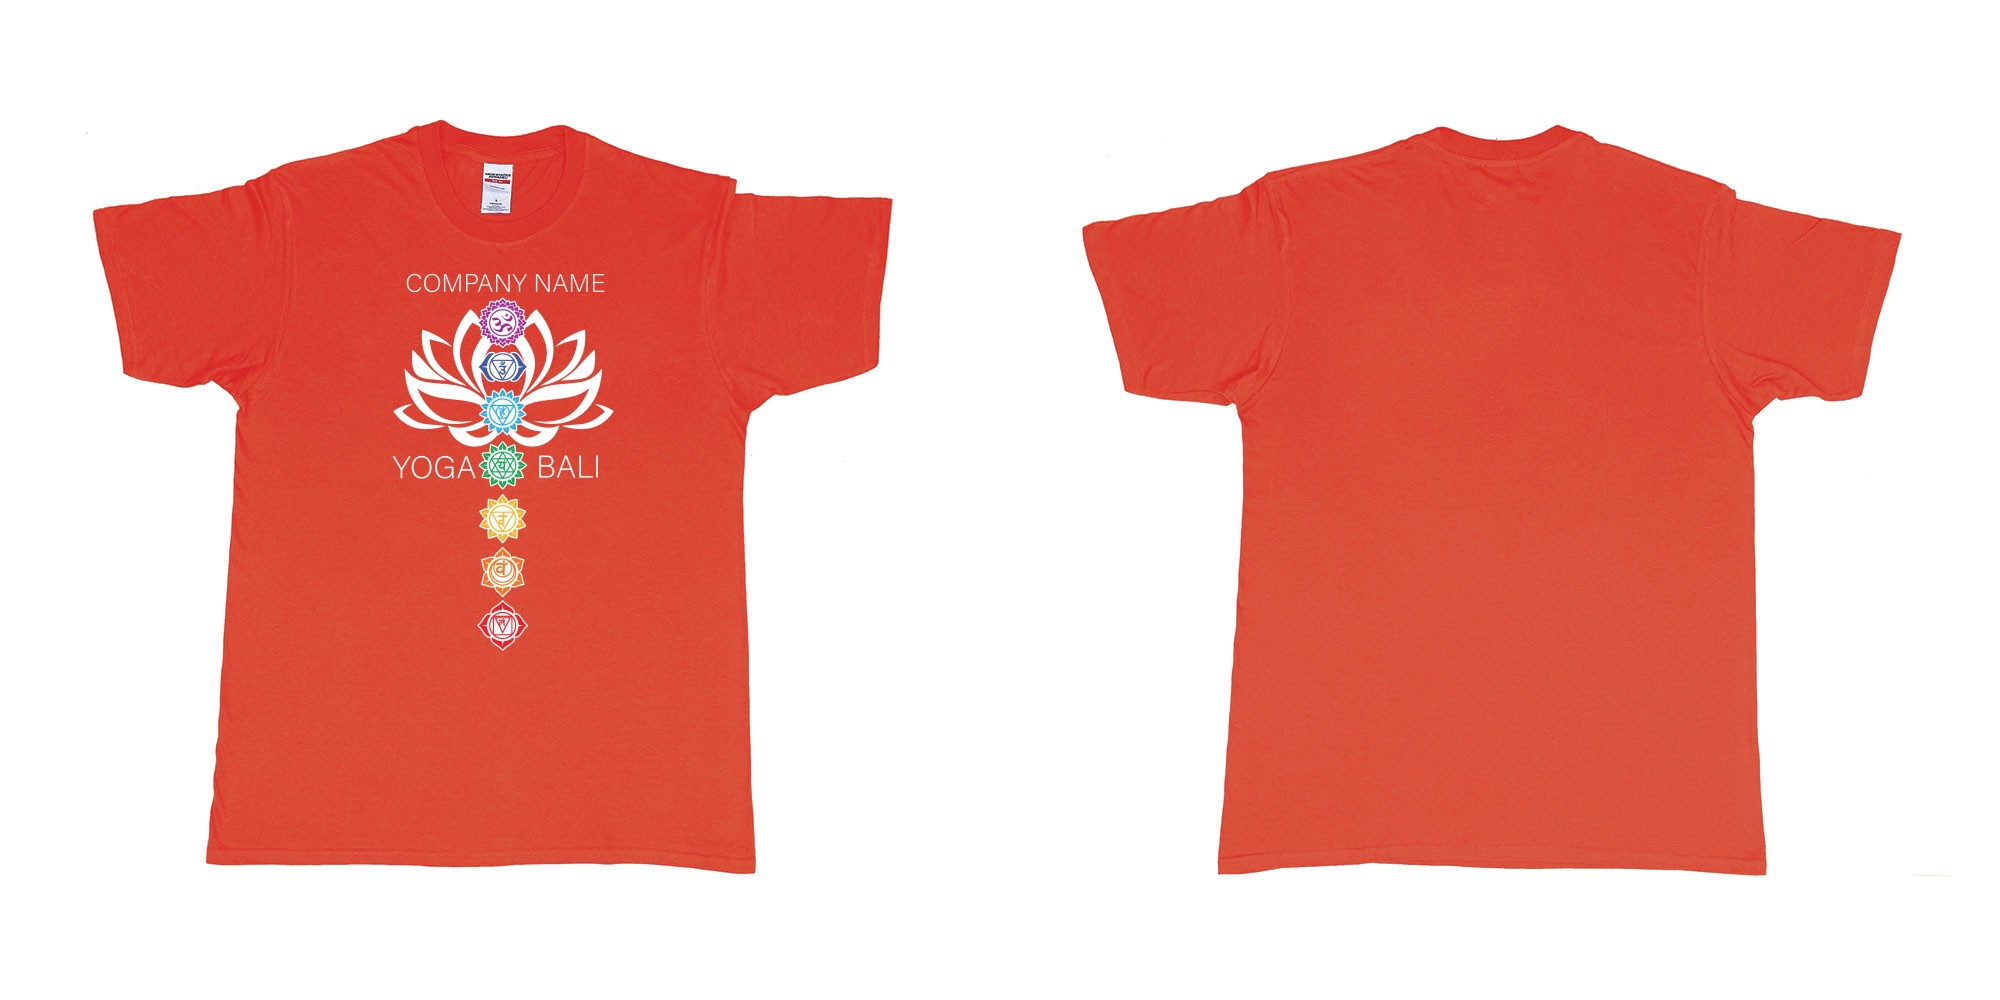 Custom tshirt design lotus flower chakras yoga hindi symbols for custom teeshirt printing in fabric color red choice your own text made in Bali by The Pirate Way